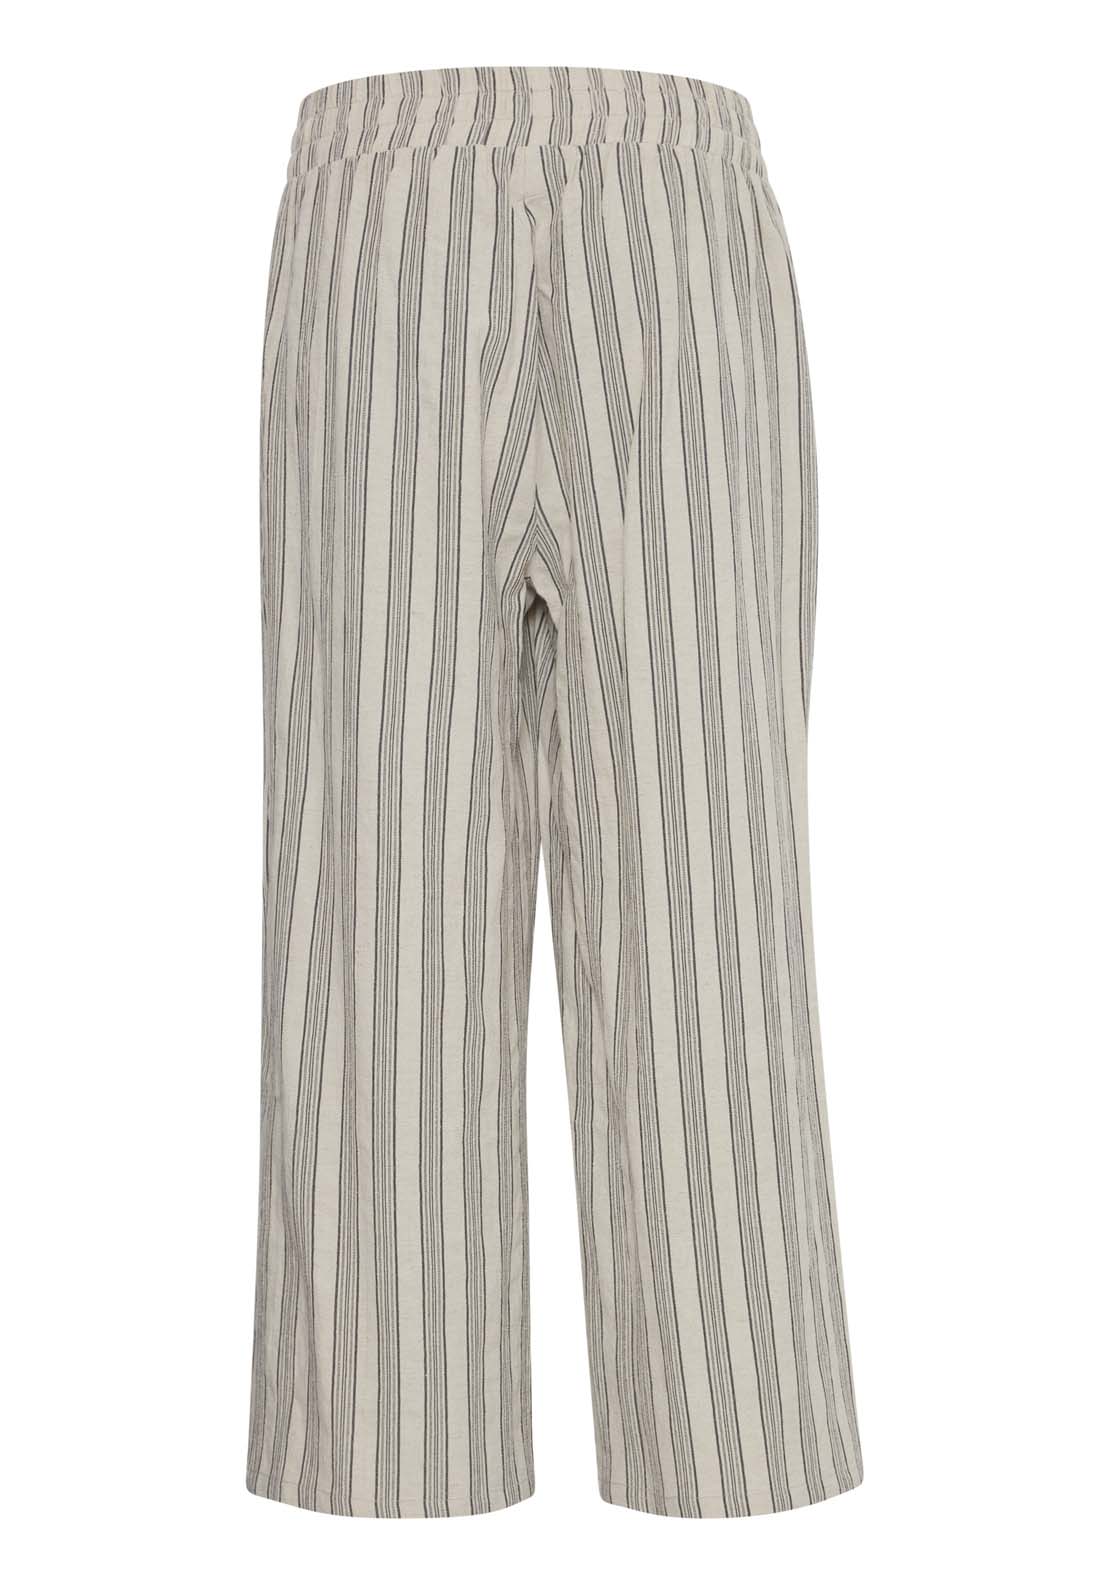 Fransa Casual Pants 2 Shaws Department Stores